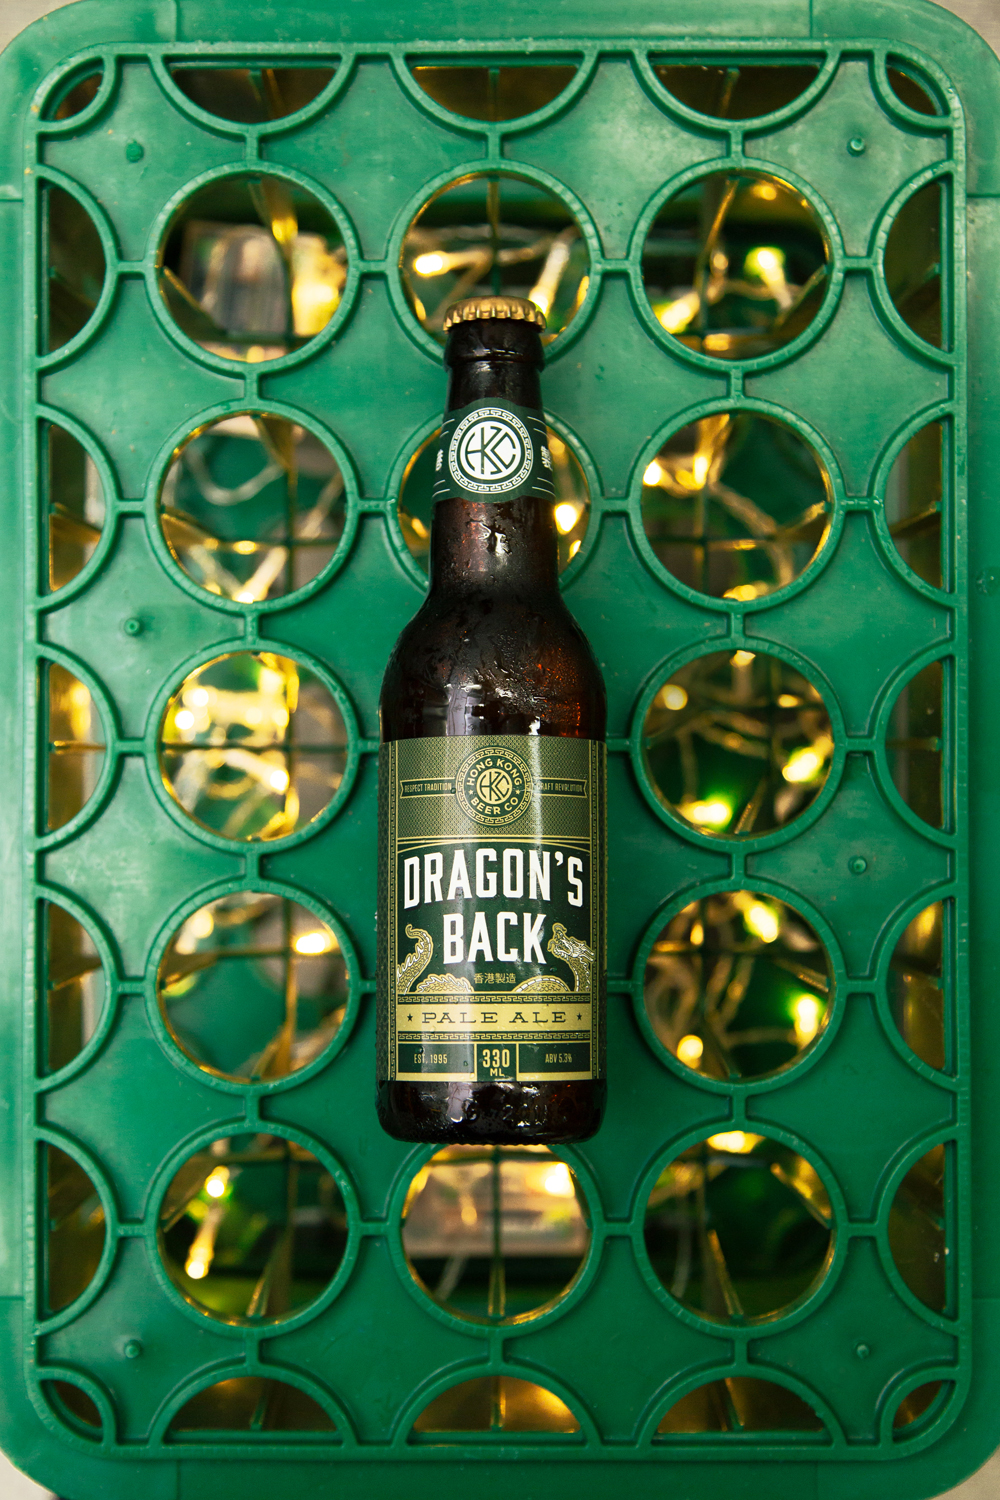 Dragon's Back Hong Kong beer –
 Holiday beer campaign for HK Beer Co